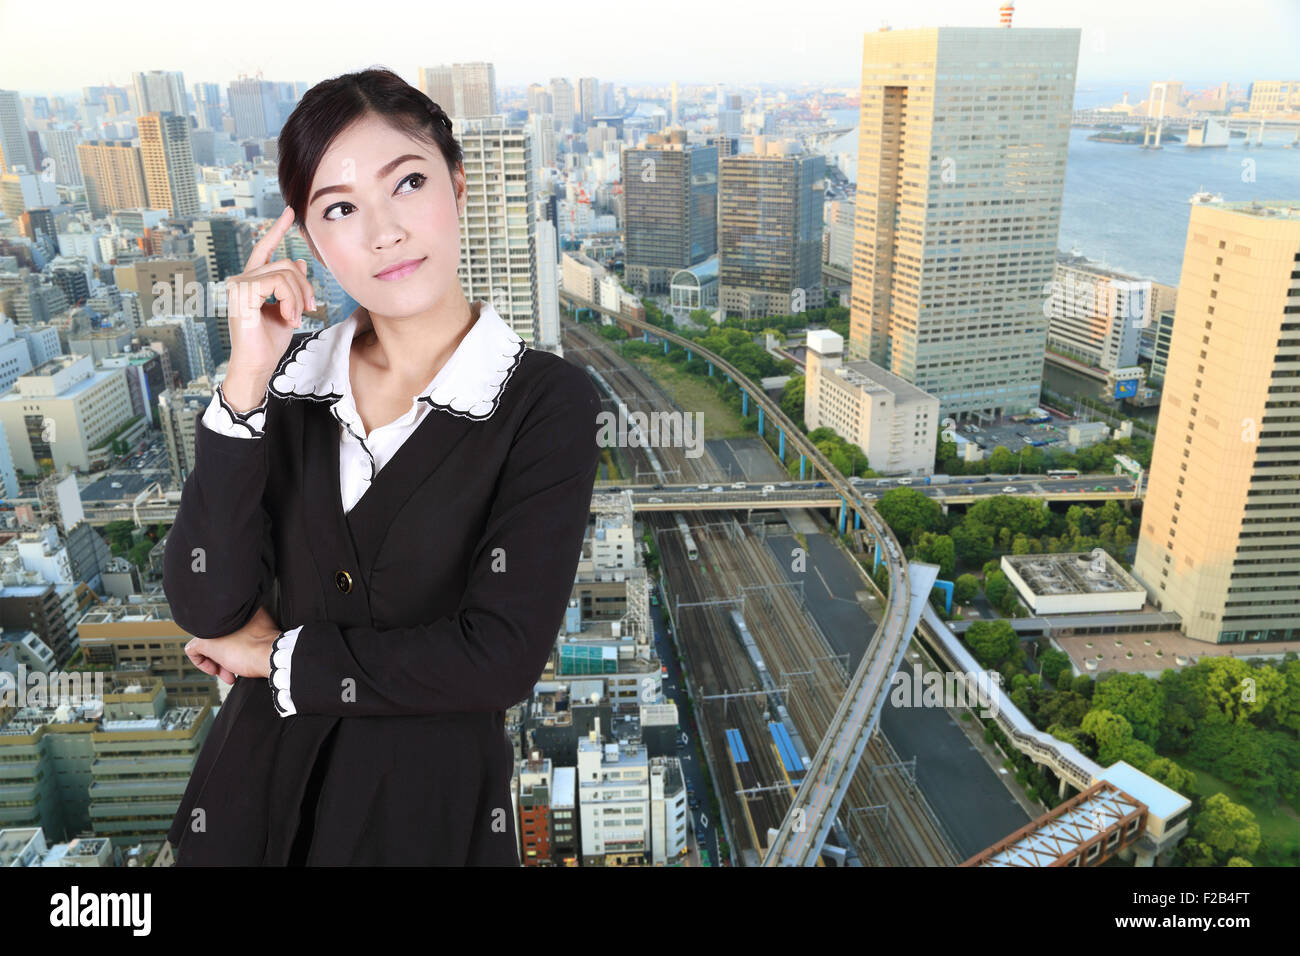 Business woman thinking with city background Stock Photo